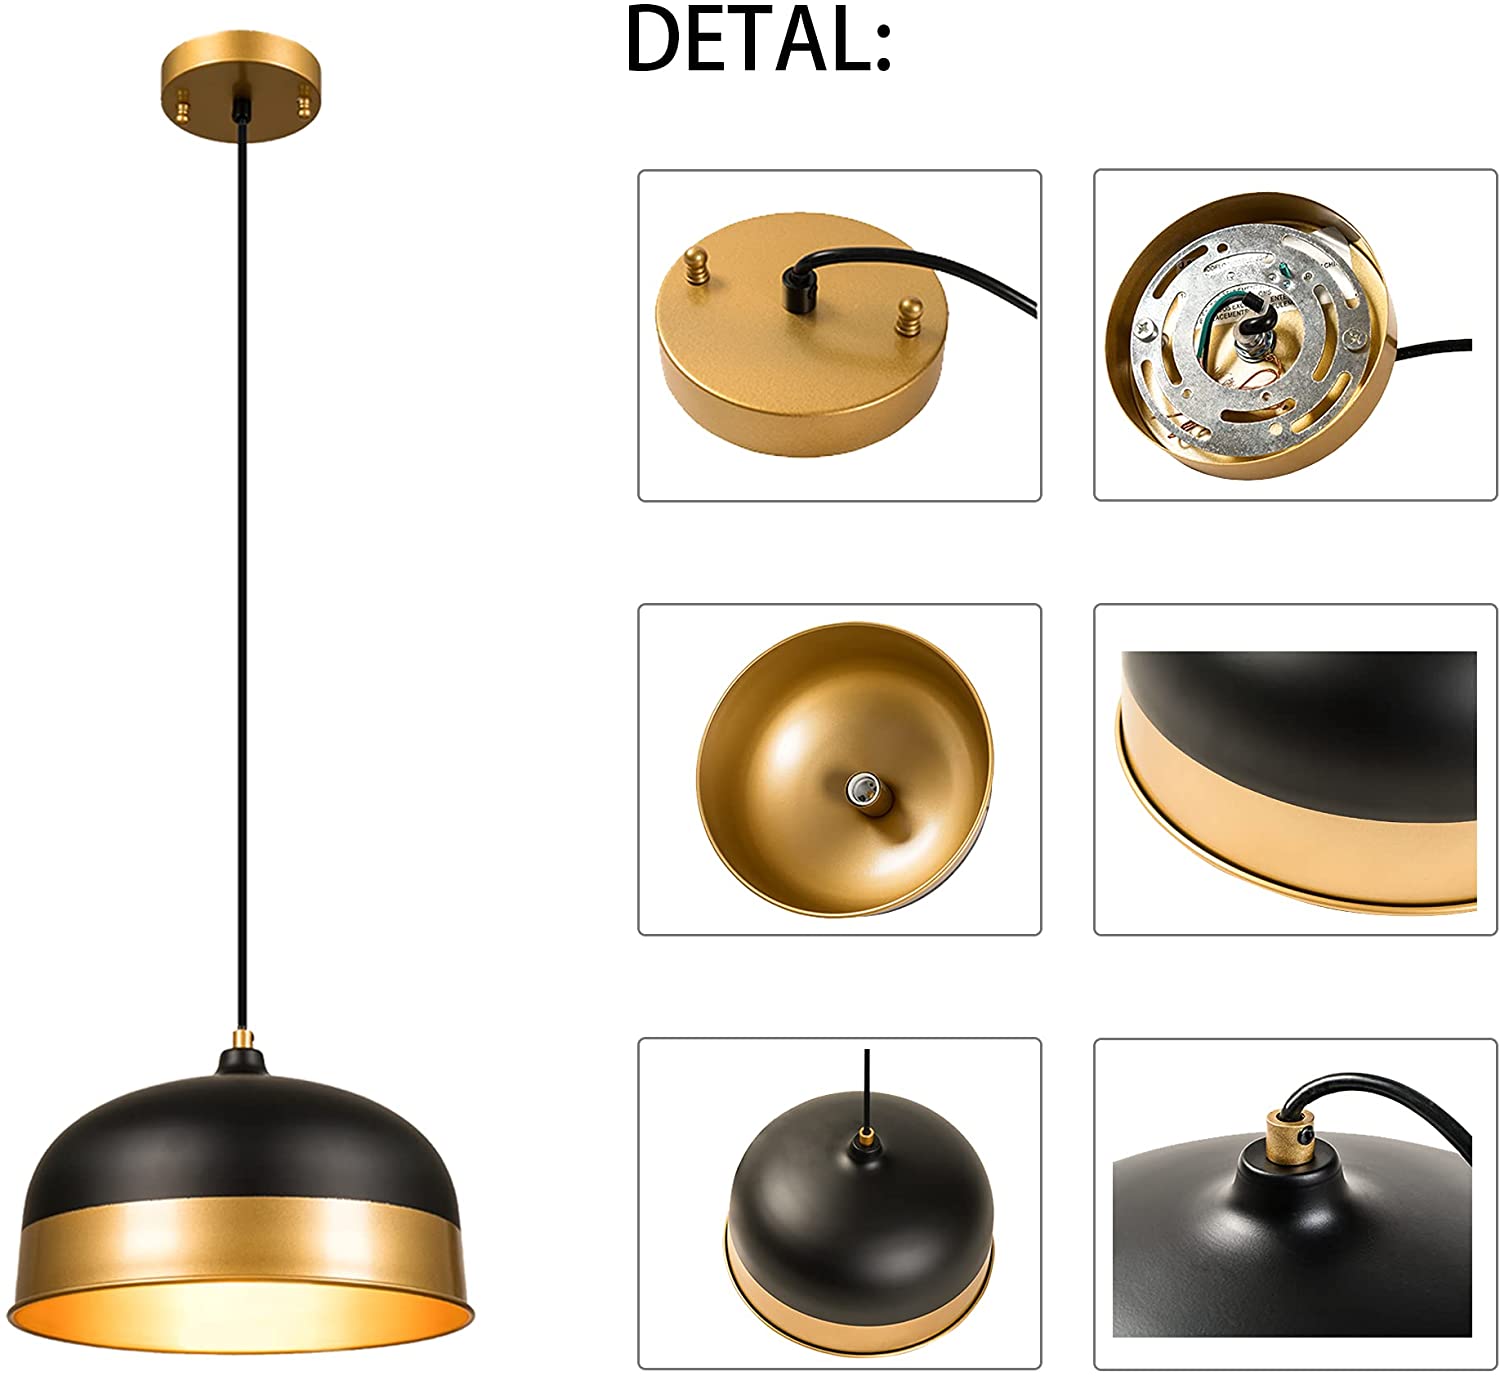 Matte black and gold dome pendant light  slop ceiling hanging lamp